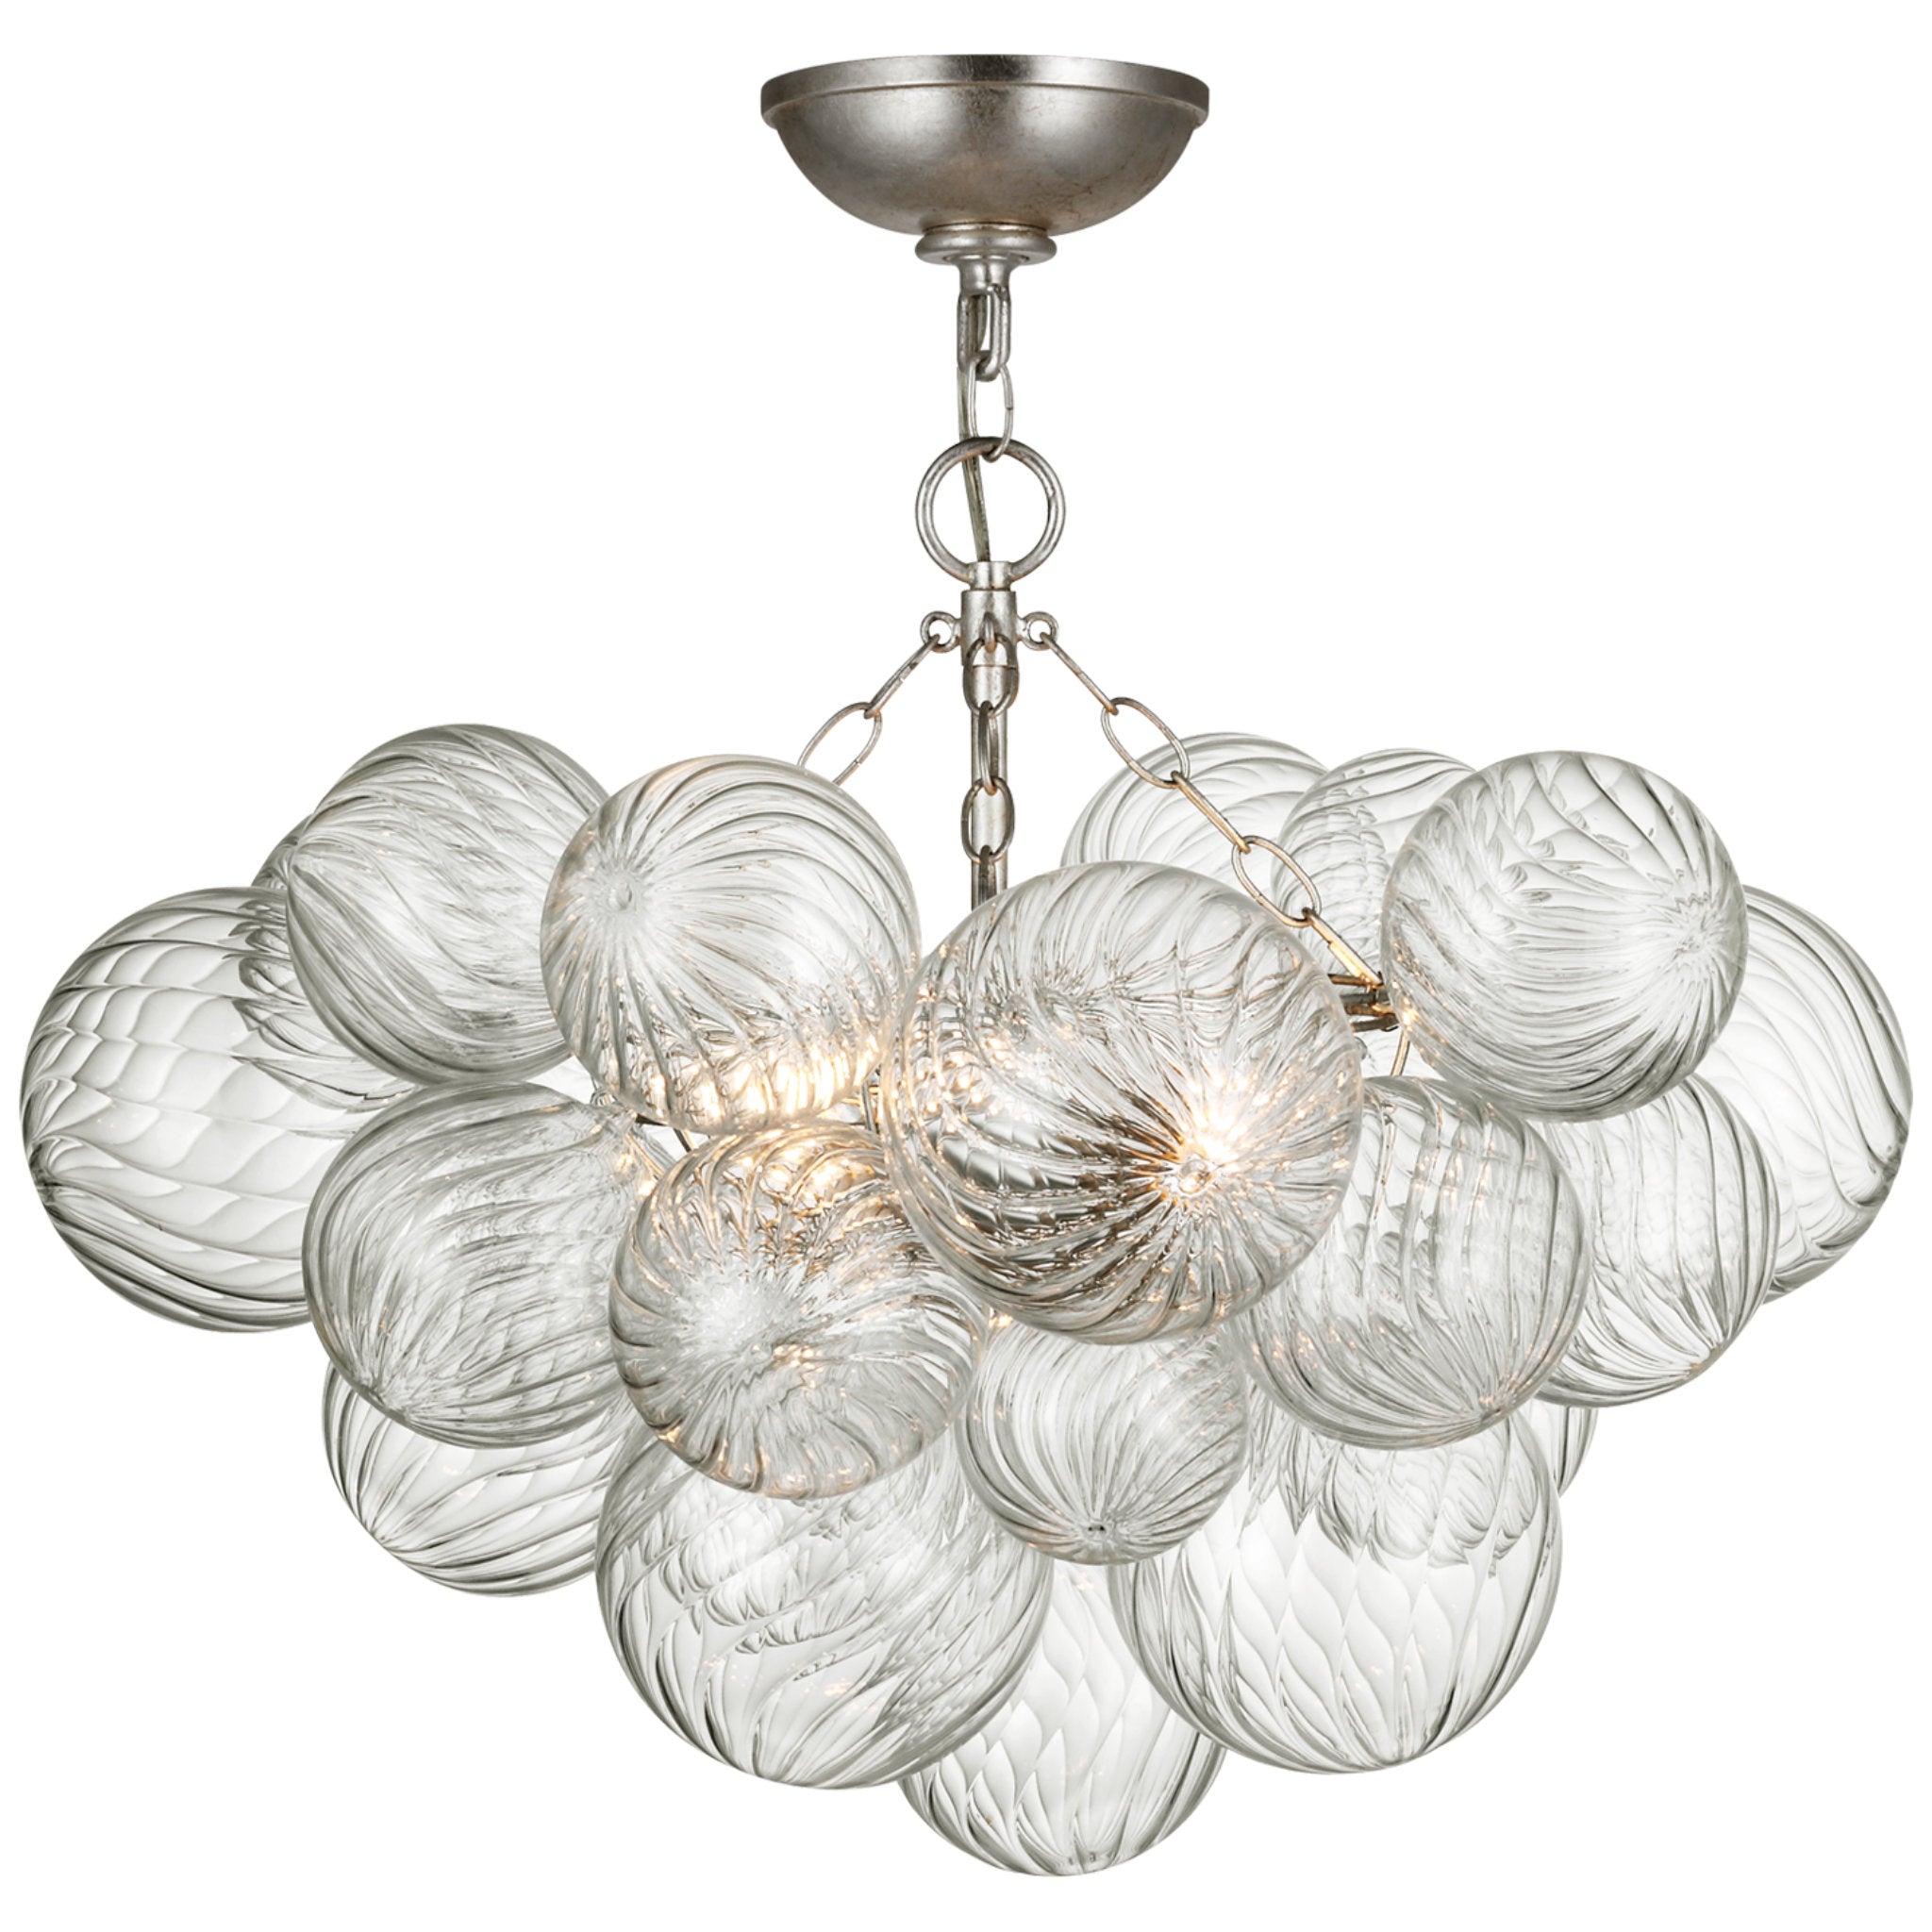 Julie Neill Talia 24" Semi-Flush Mount in Burnished Silver Leaf and Clear Swirled Glass